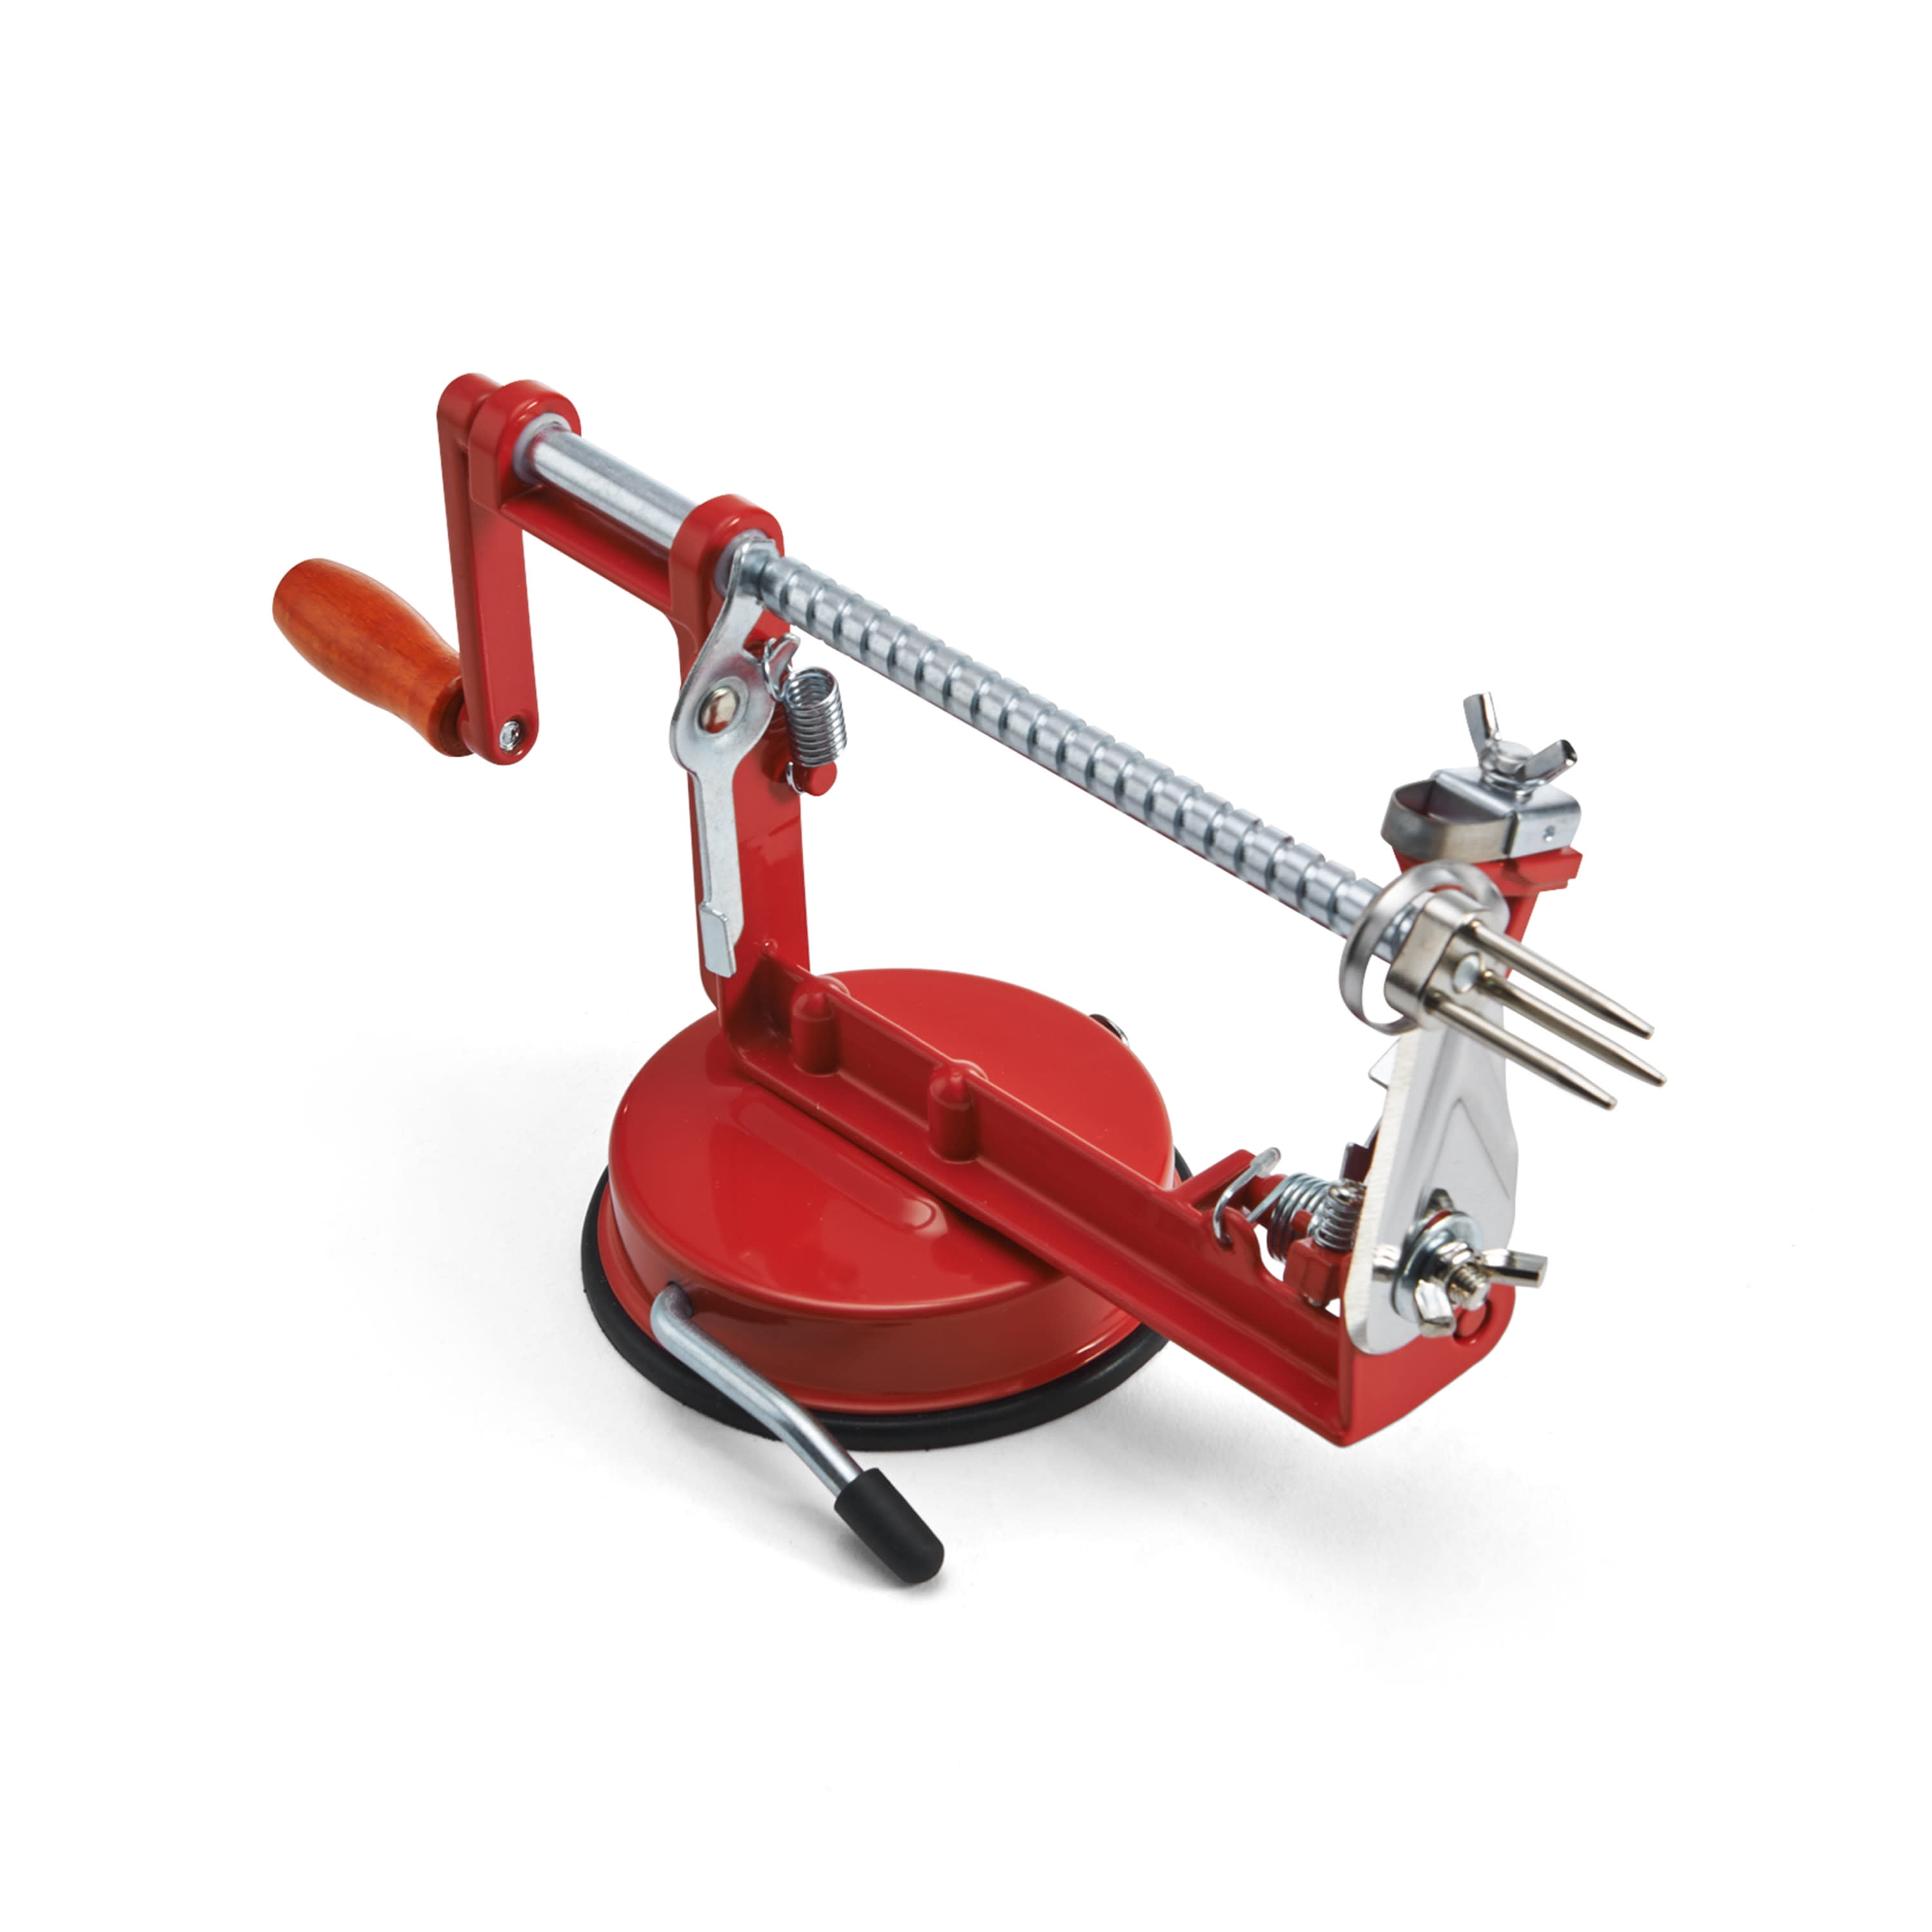 GoodCook Classic Apple Slicer, Red